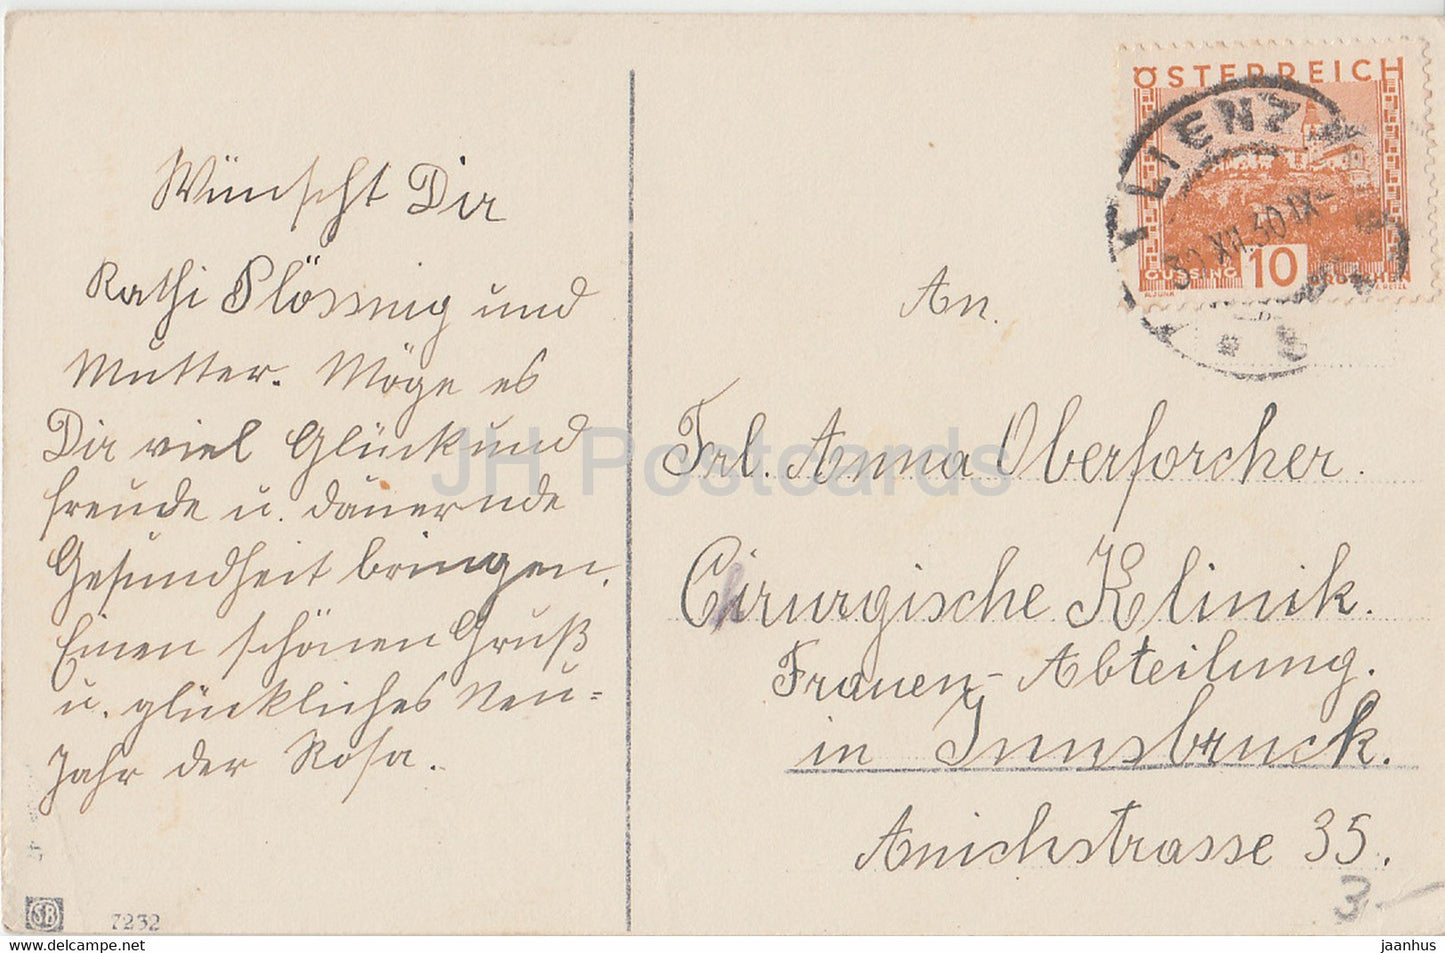 New Year Greeting Card - Ein Frohes Neues Jahr - horseshoe - SB 7232 - old postcard - 1930 - Germany - used